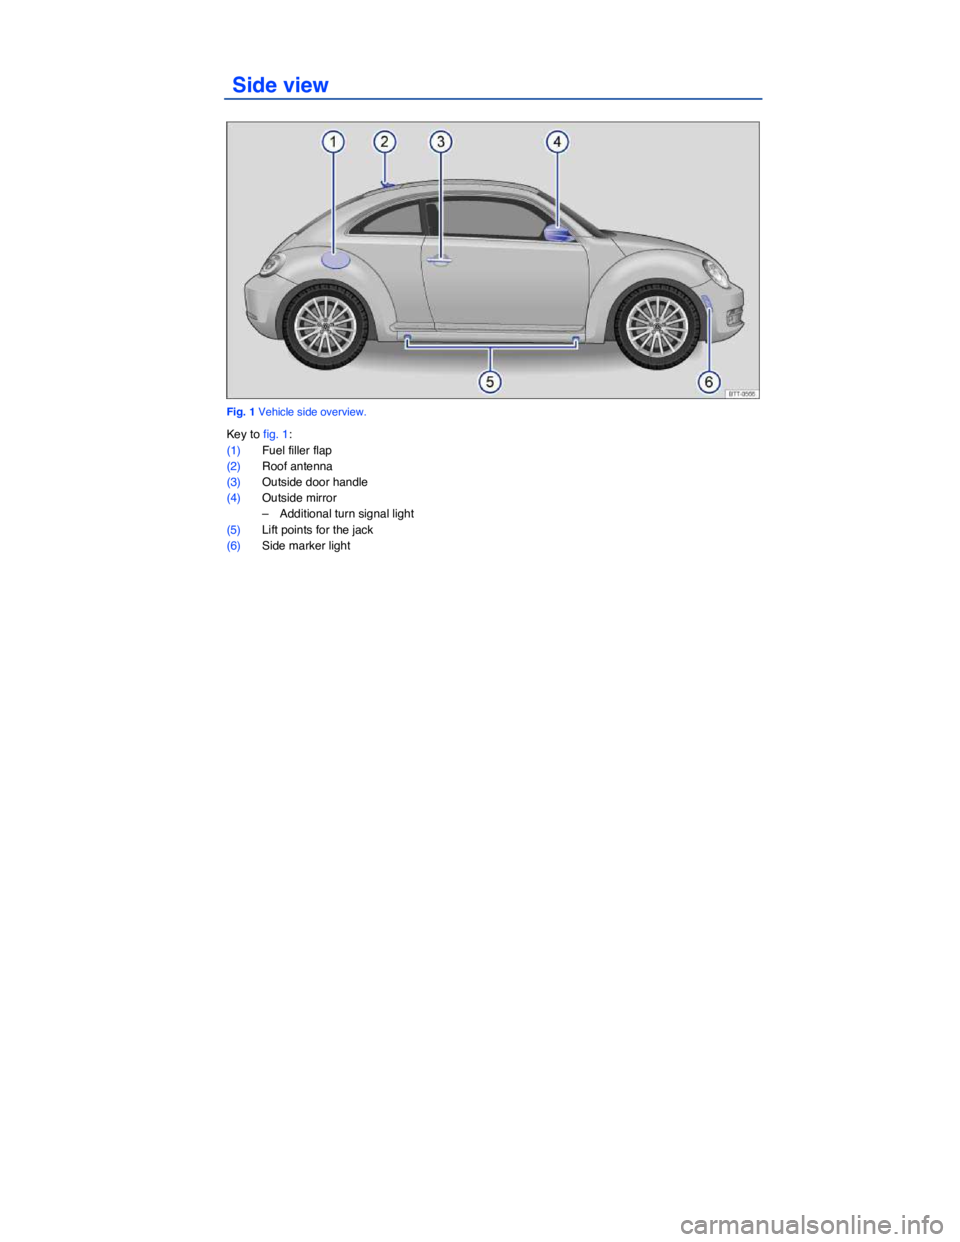 VOLKSWAGEN BEETLE 2015  Owner´s Manual  
 Side view 
 
Fig. 1 Vehicle side overview. 
Key to fig. 1: 
(1) Fuel filler flap  
(2) Roof antenna                                                                                                  